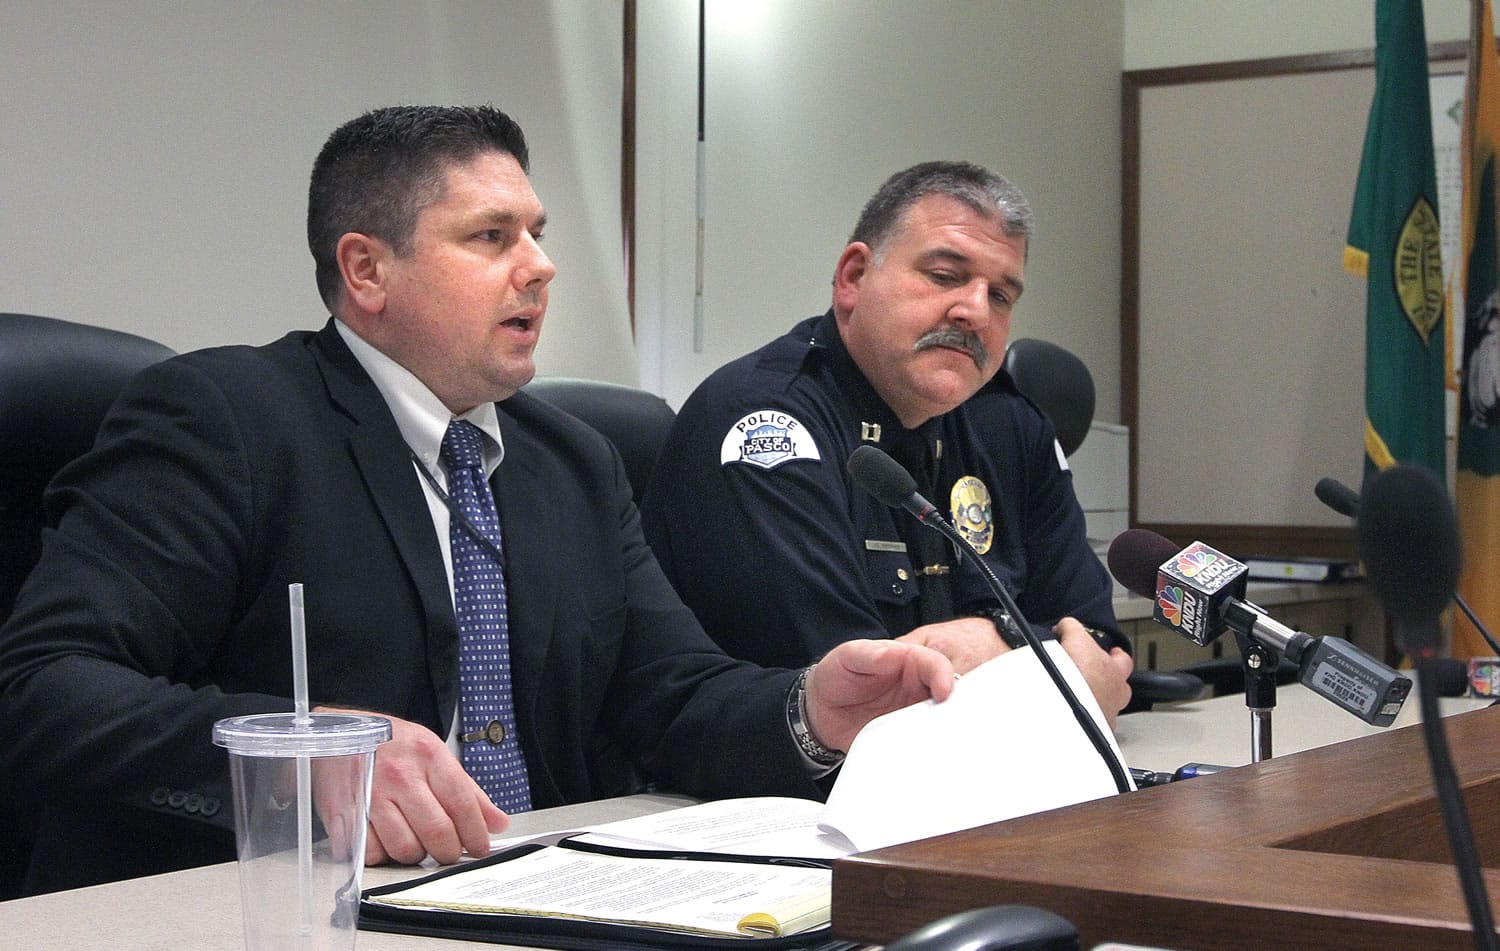 Franklin County Prosecuting Attorney Shawn Sant, left, and Pasco Police Capt. James Raymond hold a news conference Tuesday  regarding the shooting death of Stephan Sergio Aceves, 28, of Pasco.